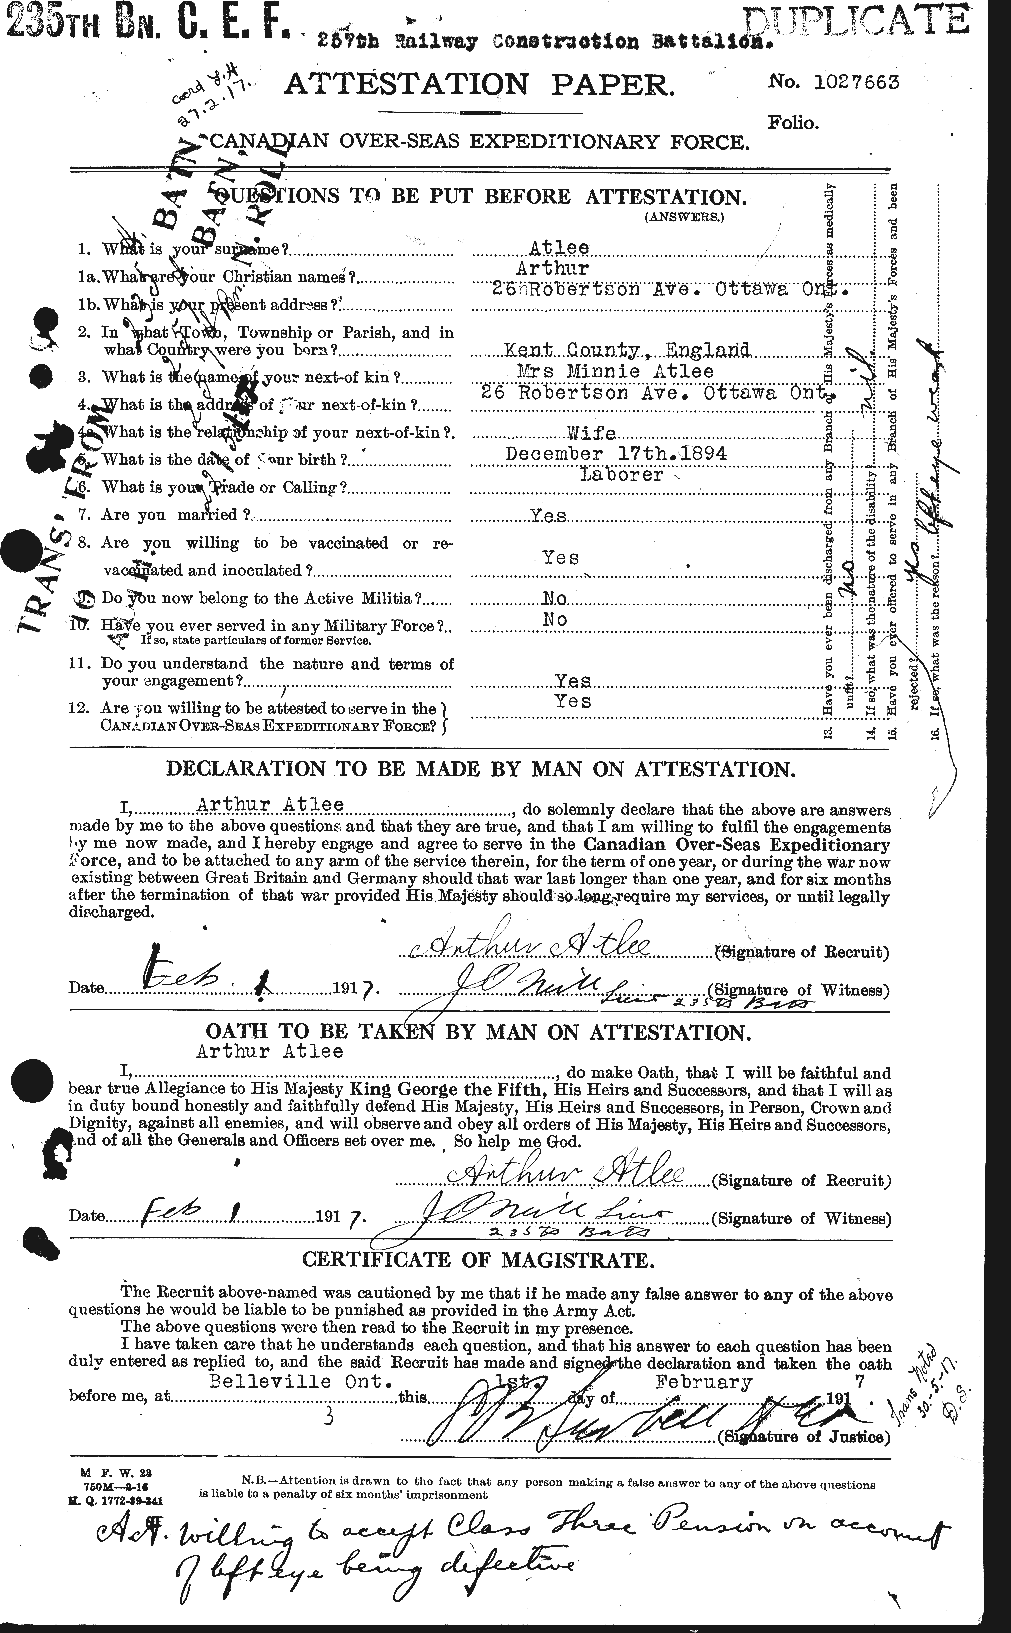 Personnel Records of the First World War - CEF 224159a